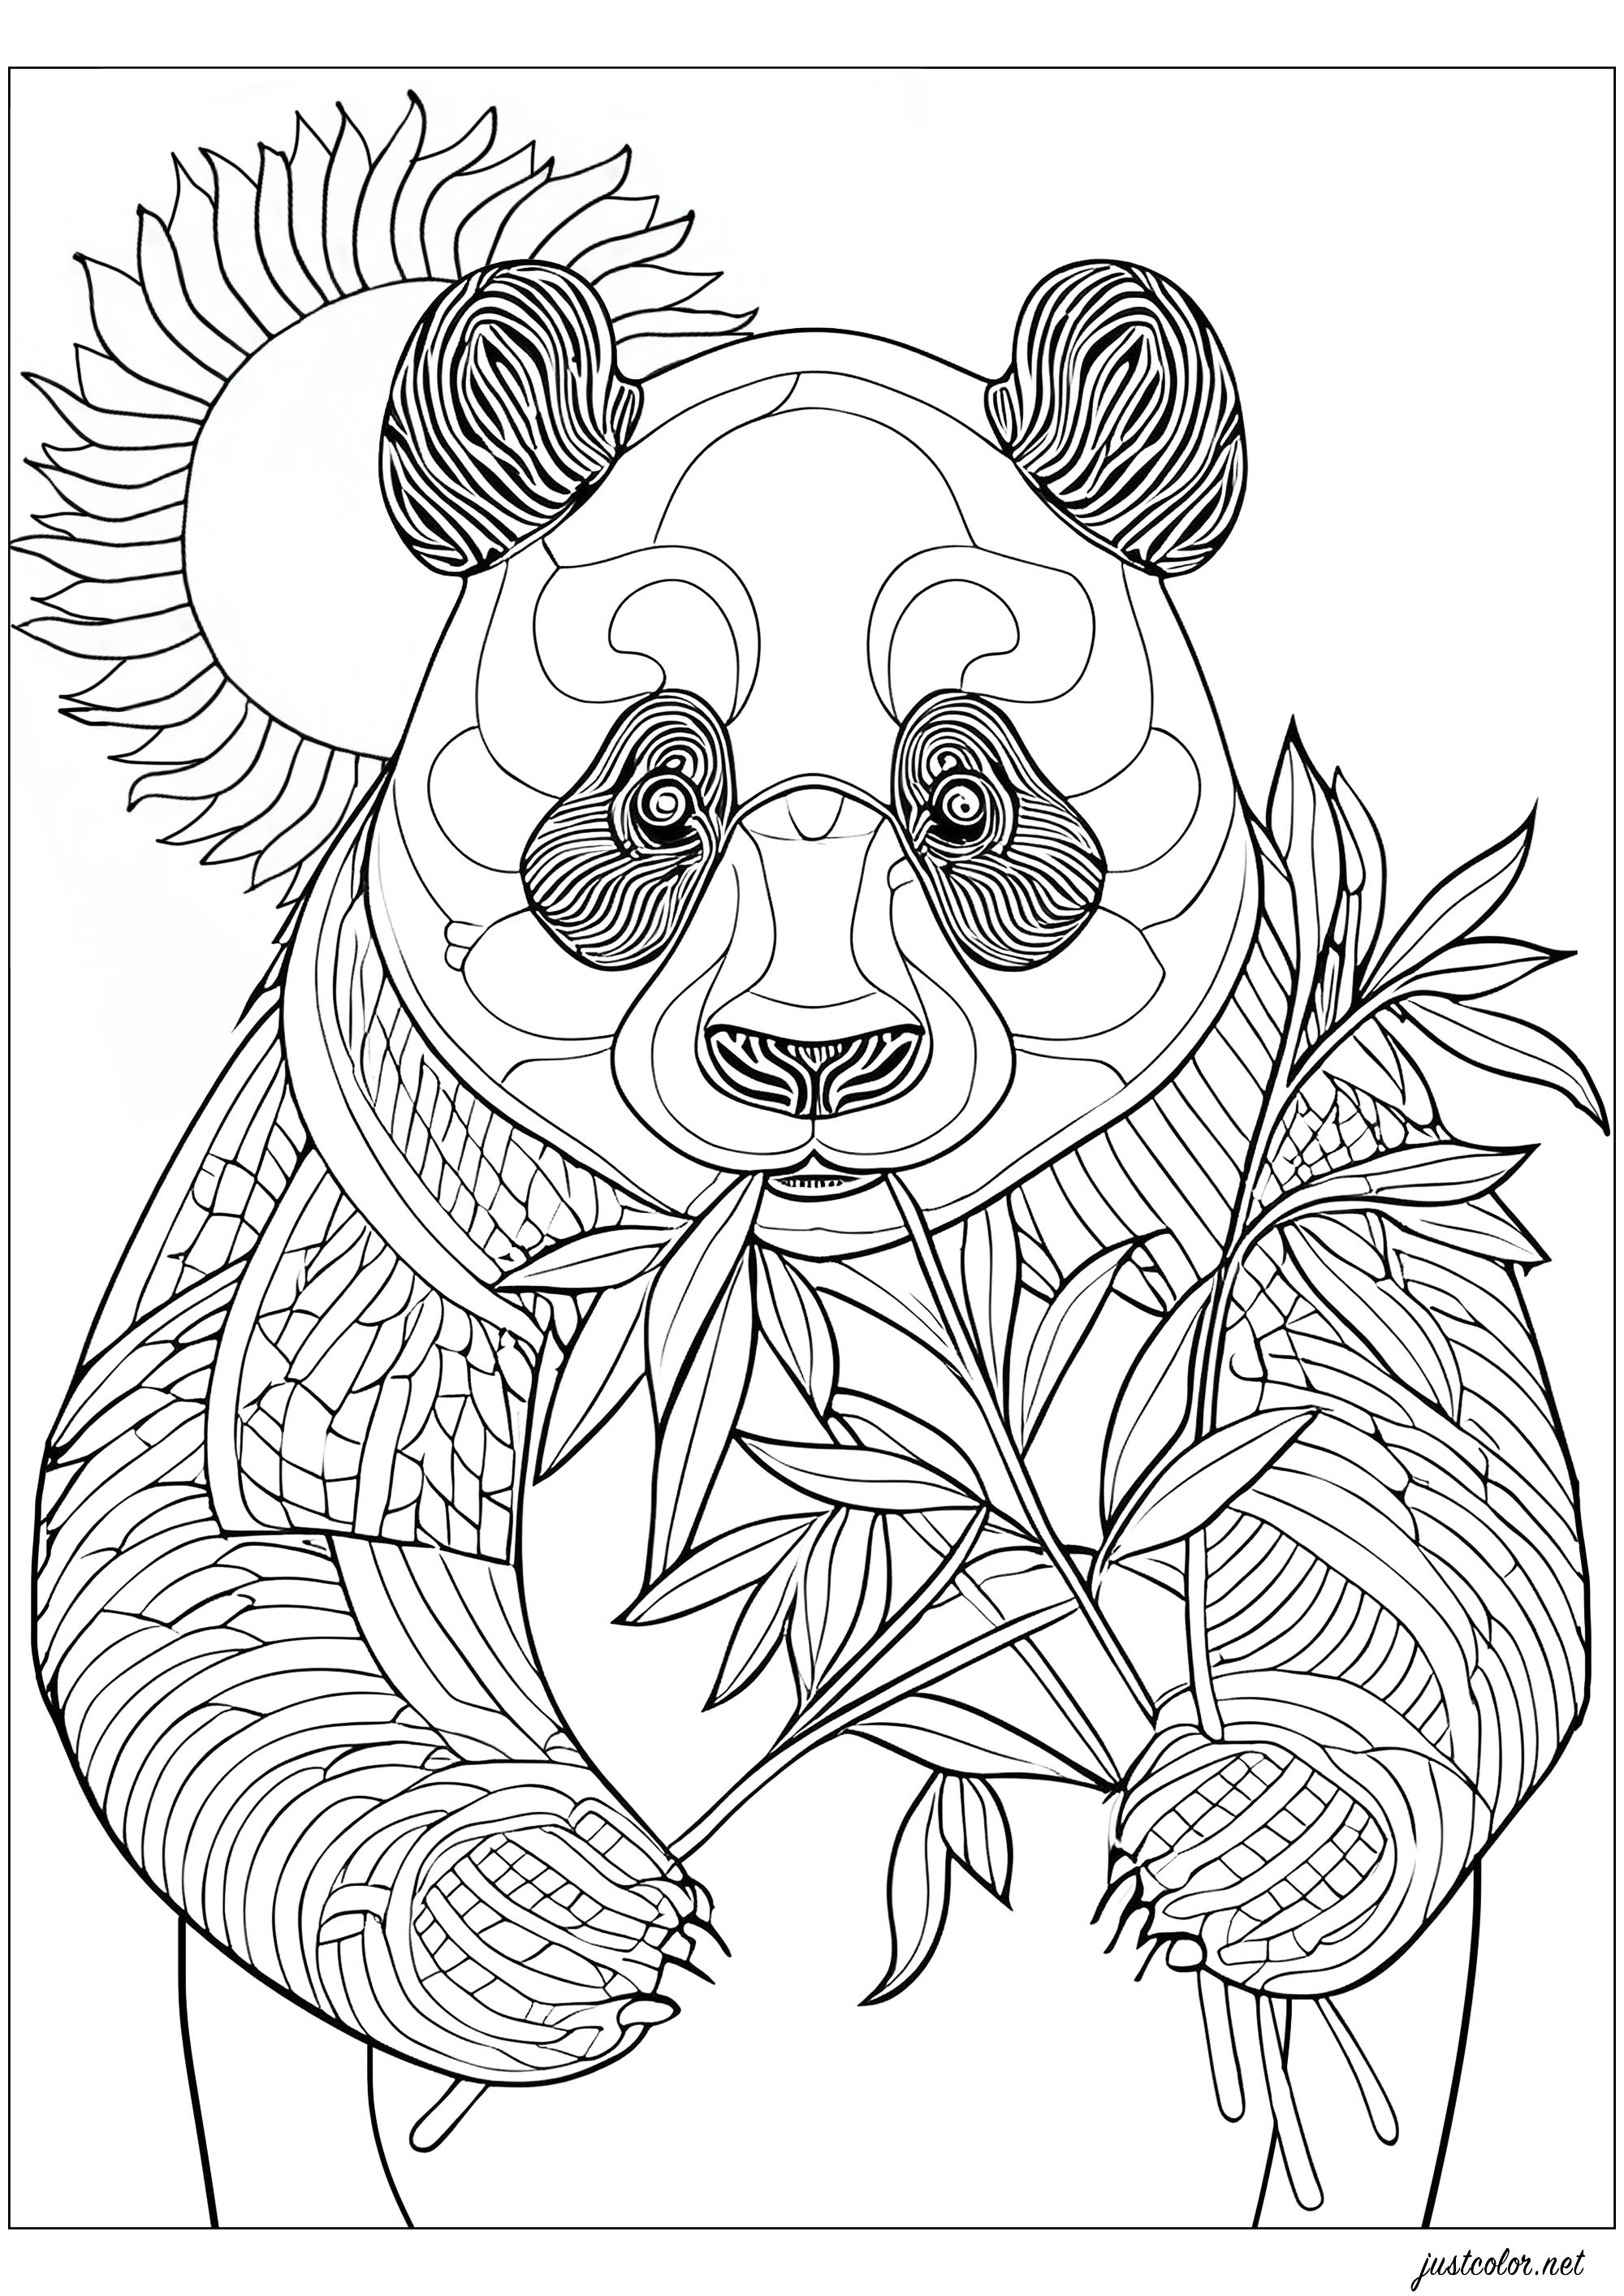 Panda eating bamboo, standing. Also color the pretty sun behind him